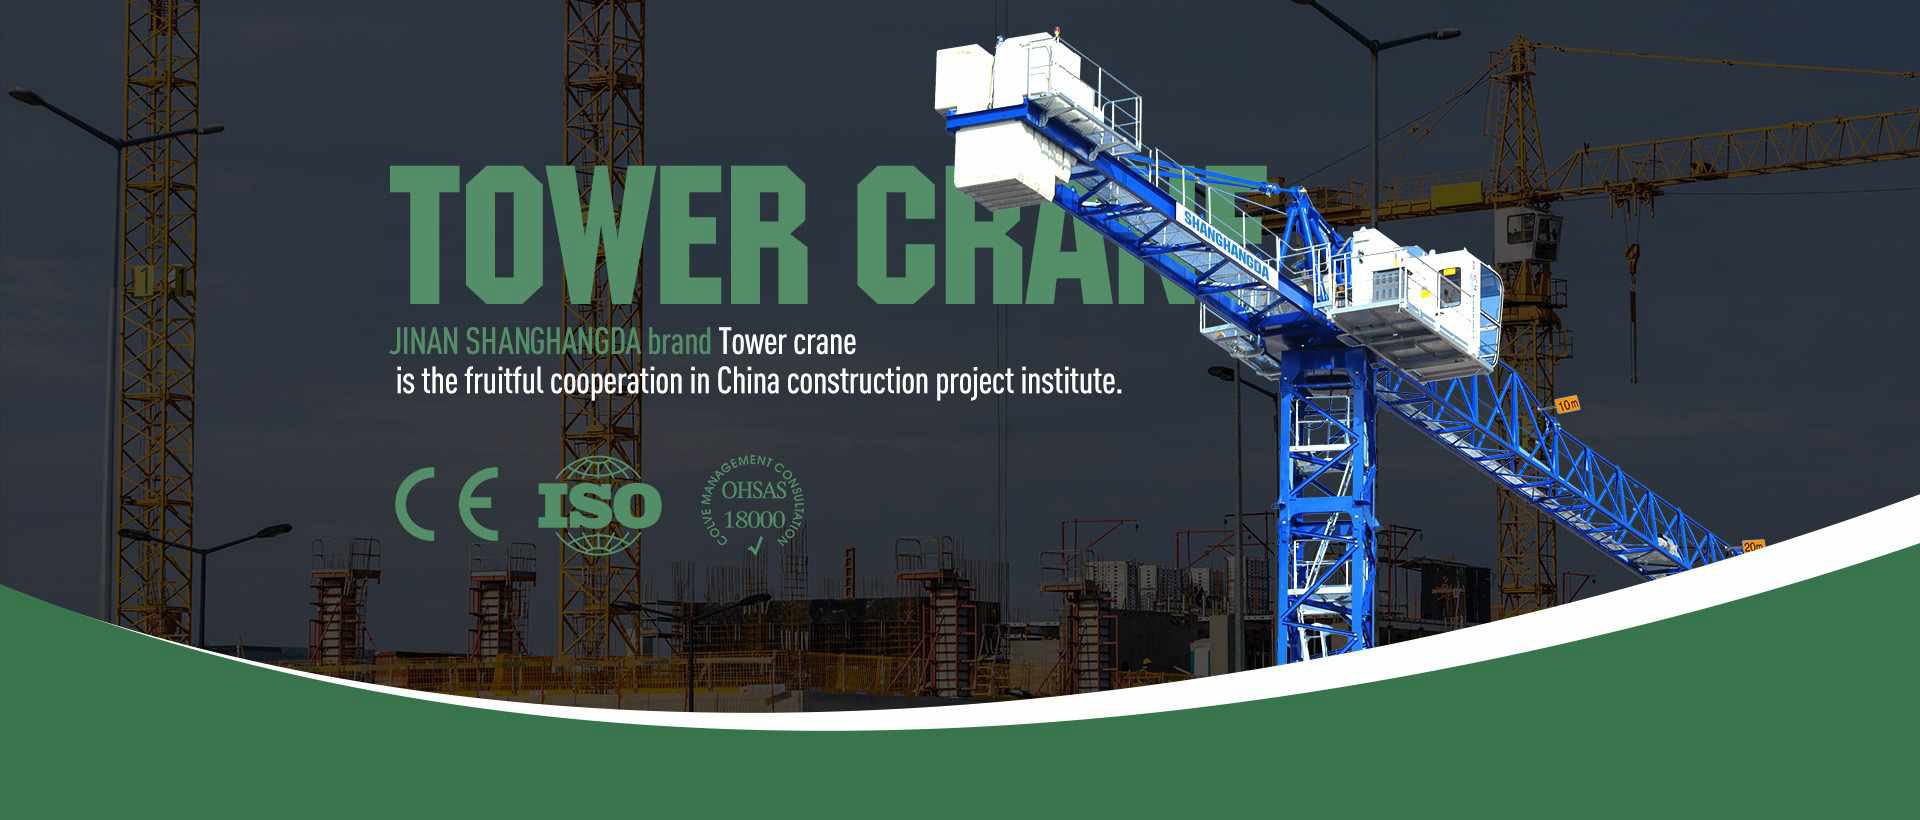 What is the tower crane?